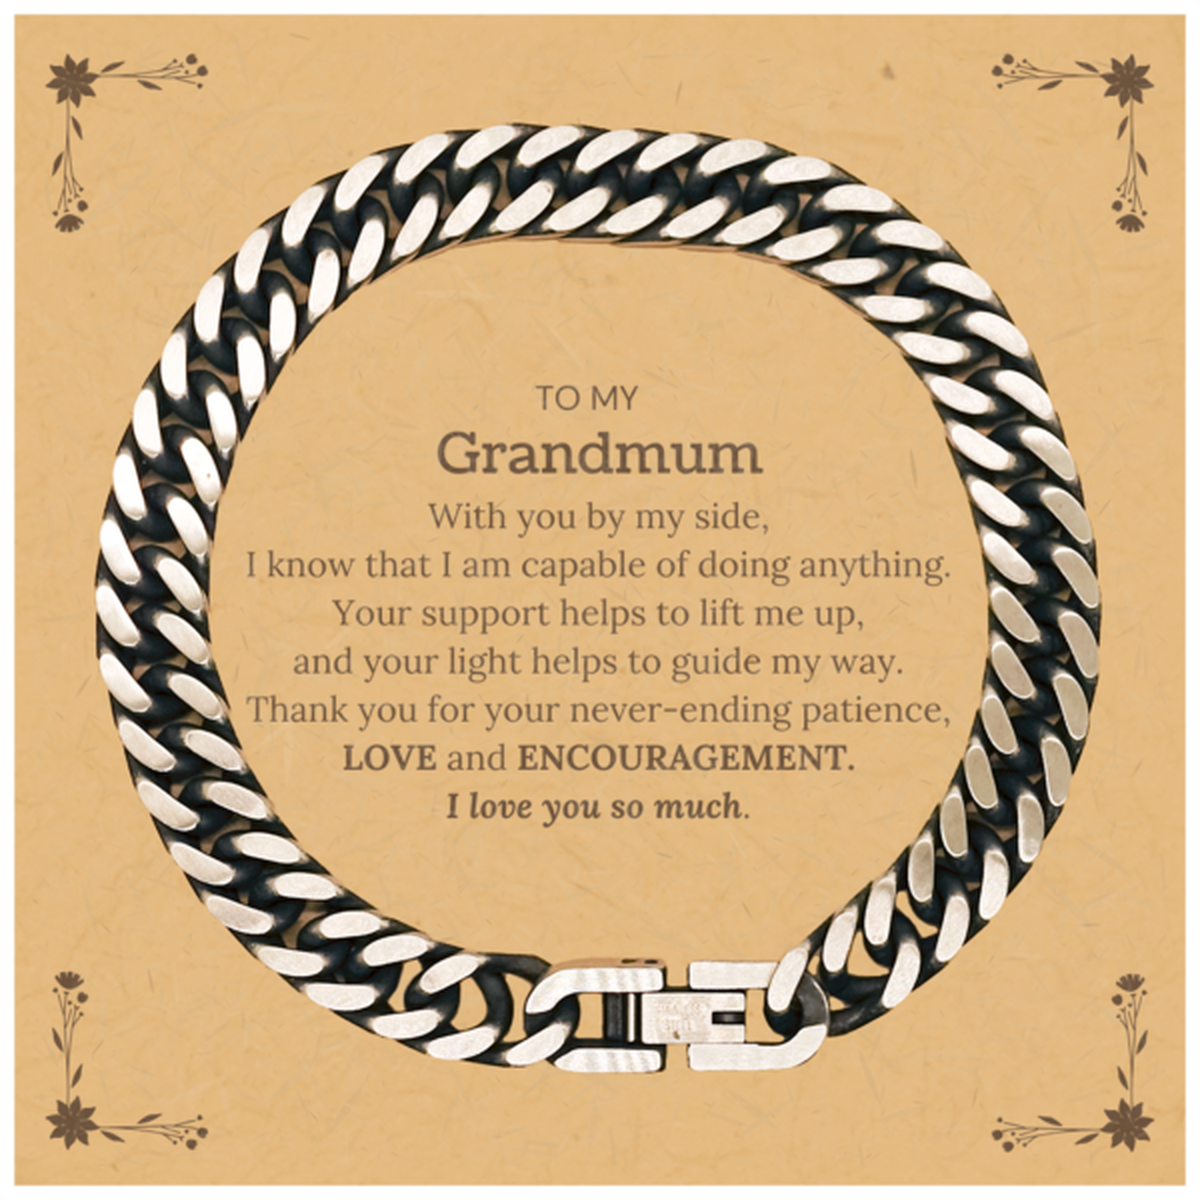 Appreciation Grandmum Cuban Link Chain Bracelet Gifts, To My Grandmum Birthday Christmas Wedding Keepsake Gifts for Grandmum With you by my side, I know that I am capable of doing anything. I love you so much